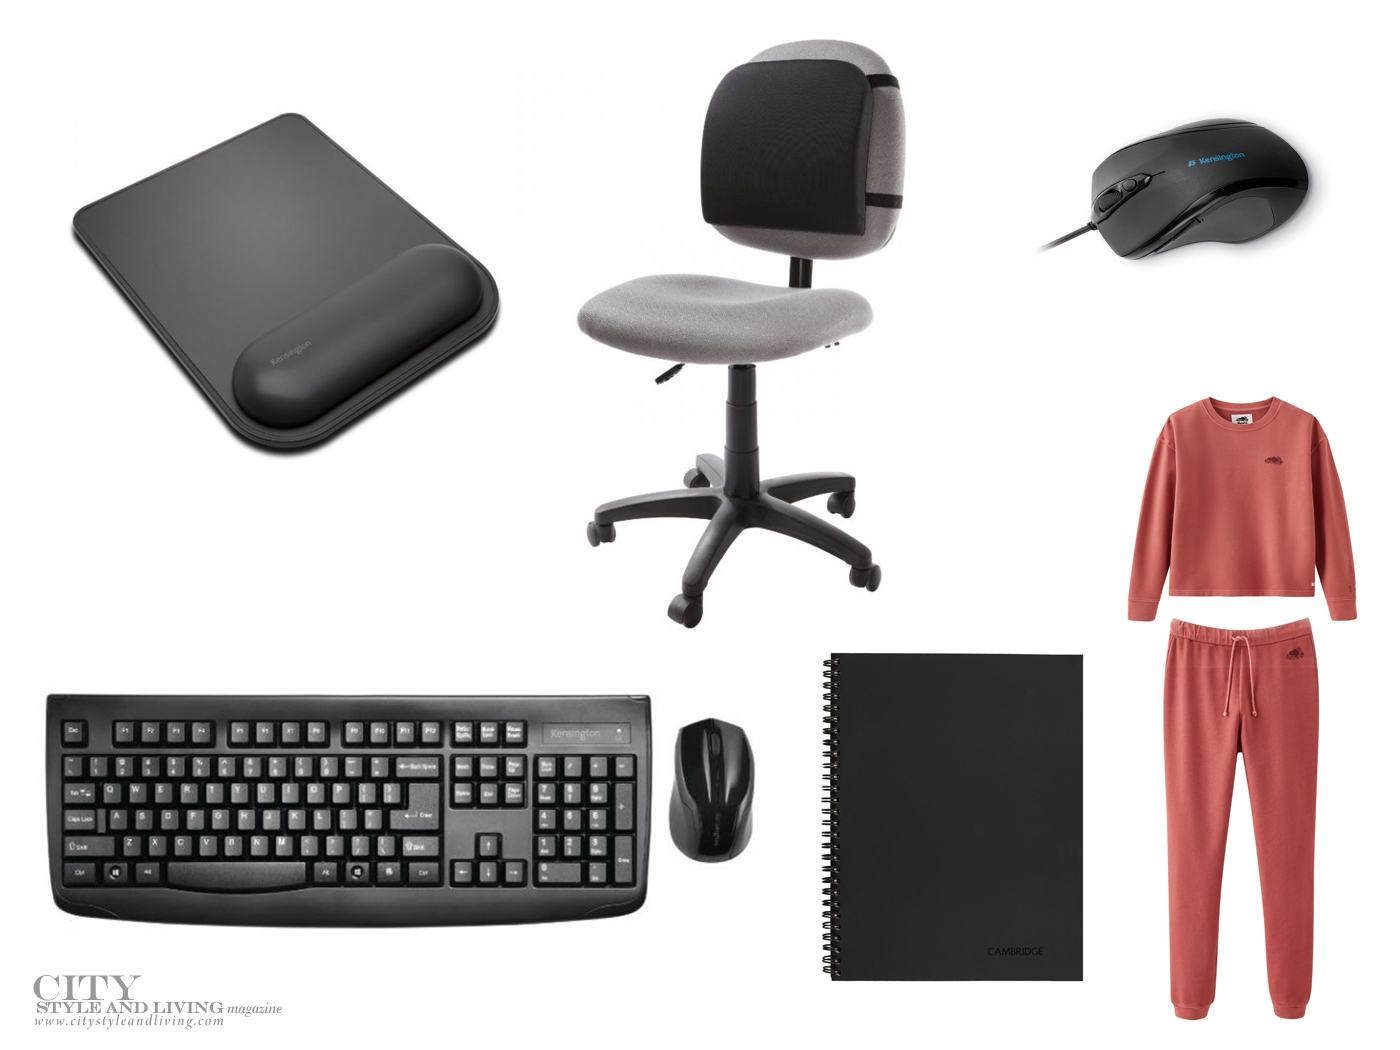 City Style and Living Summer 2021 Create An Ergonomic Home Office